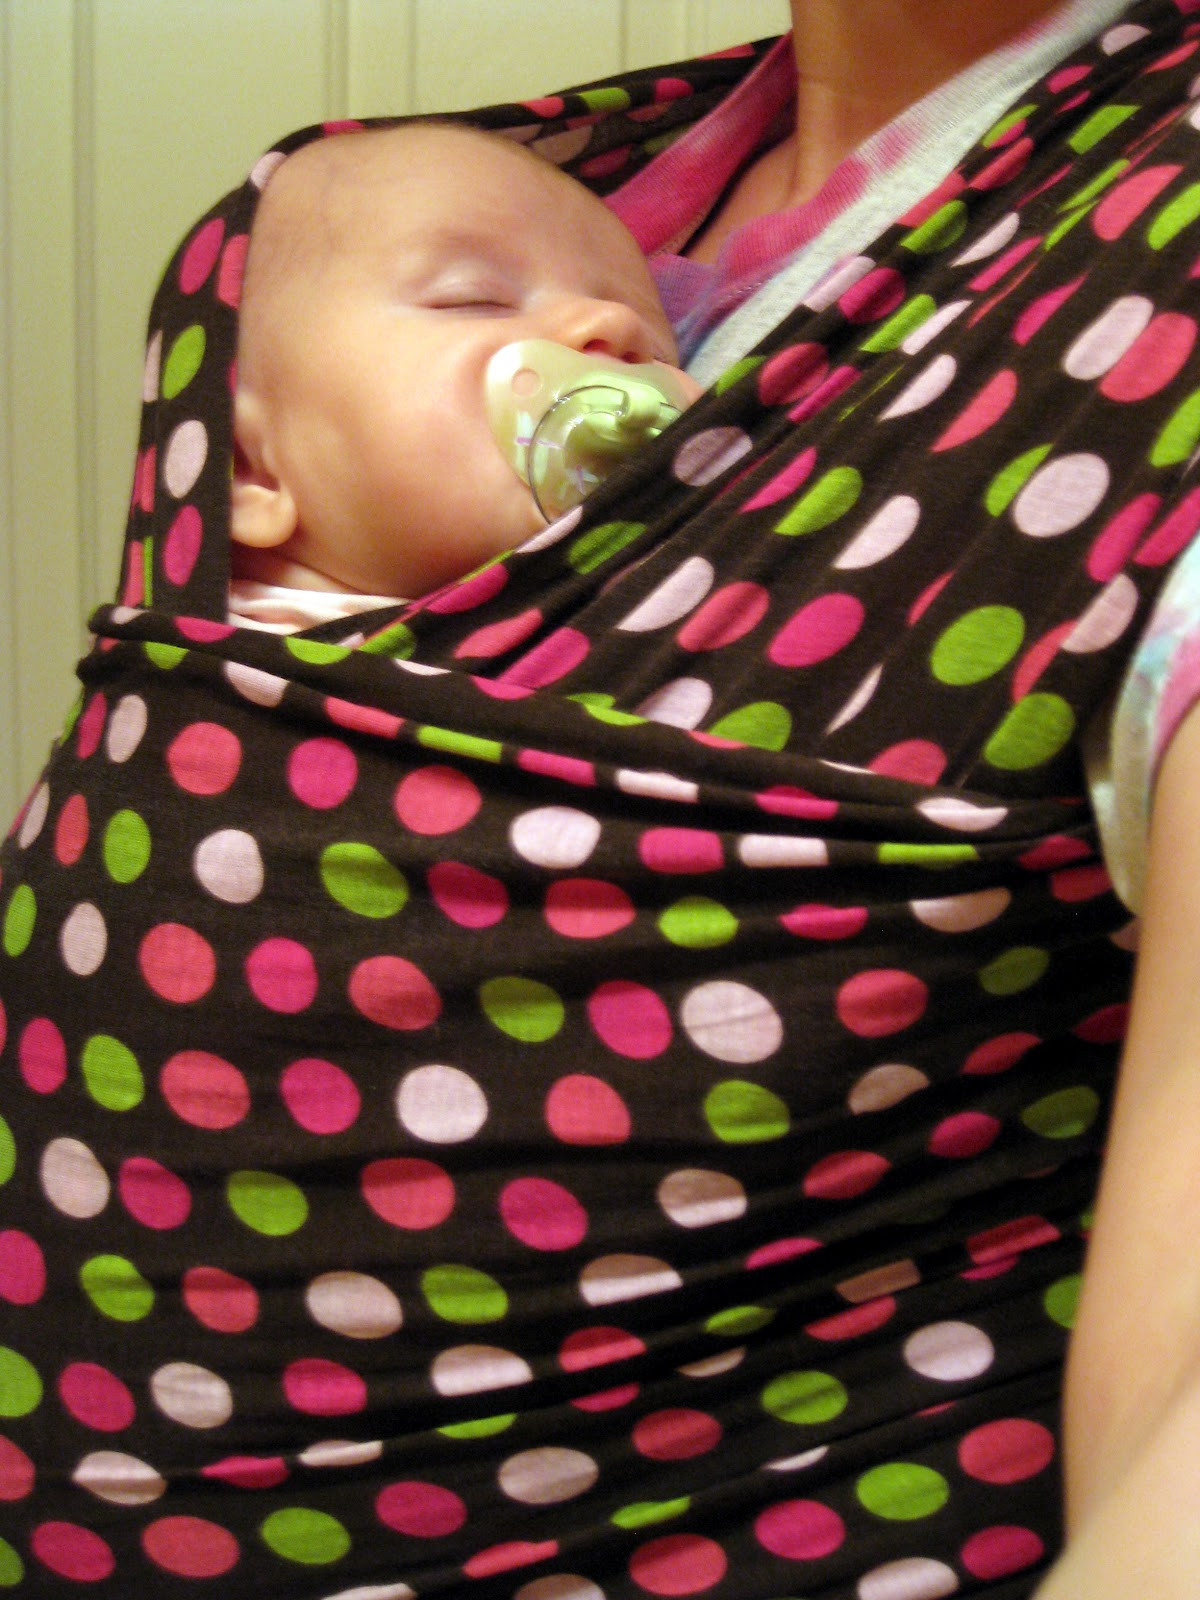 Woven Baby Wrap Diy
 fruitpants DIY Stretchy and Woven Baby Wrap